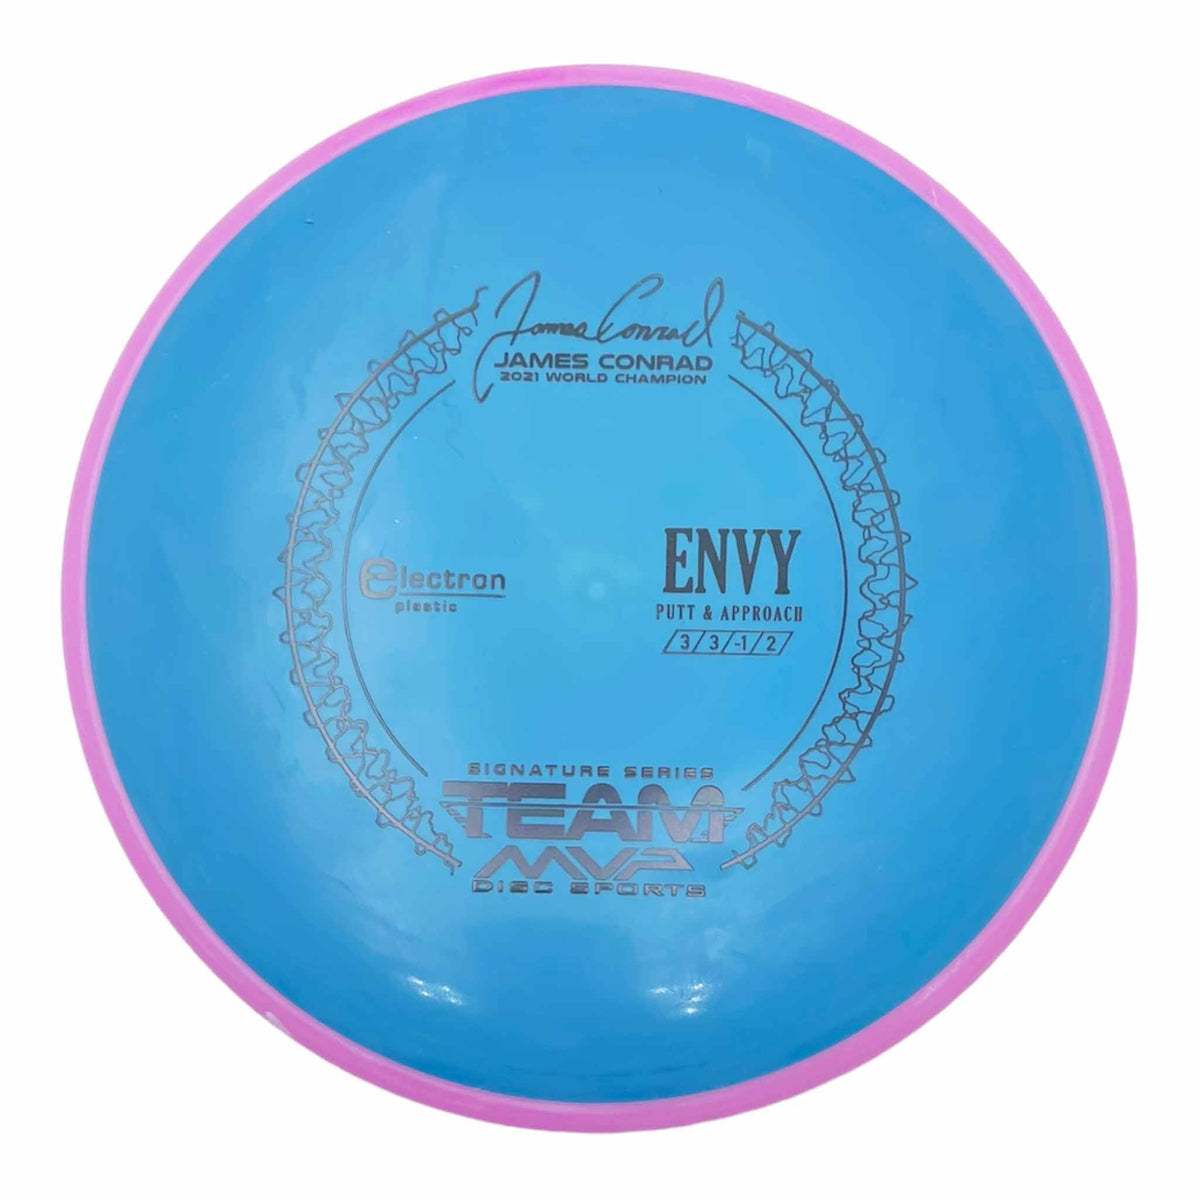 Axiom Discs James Conrad Electron Envy putter and approach - Blue / Pink